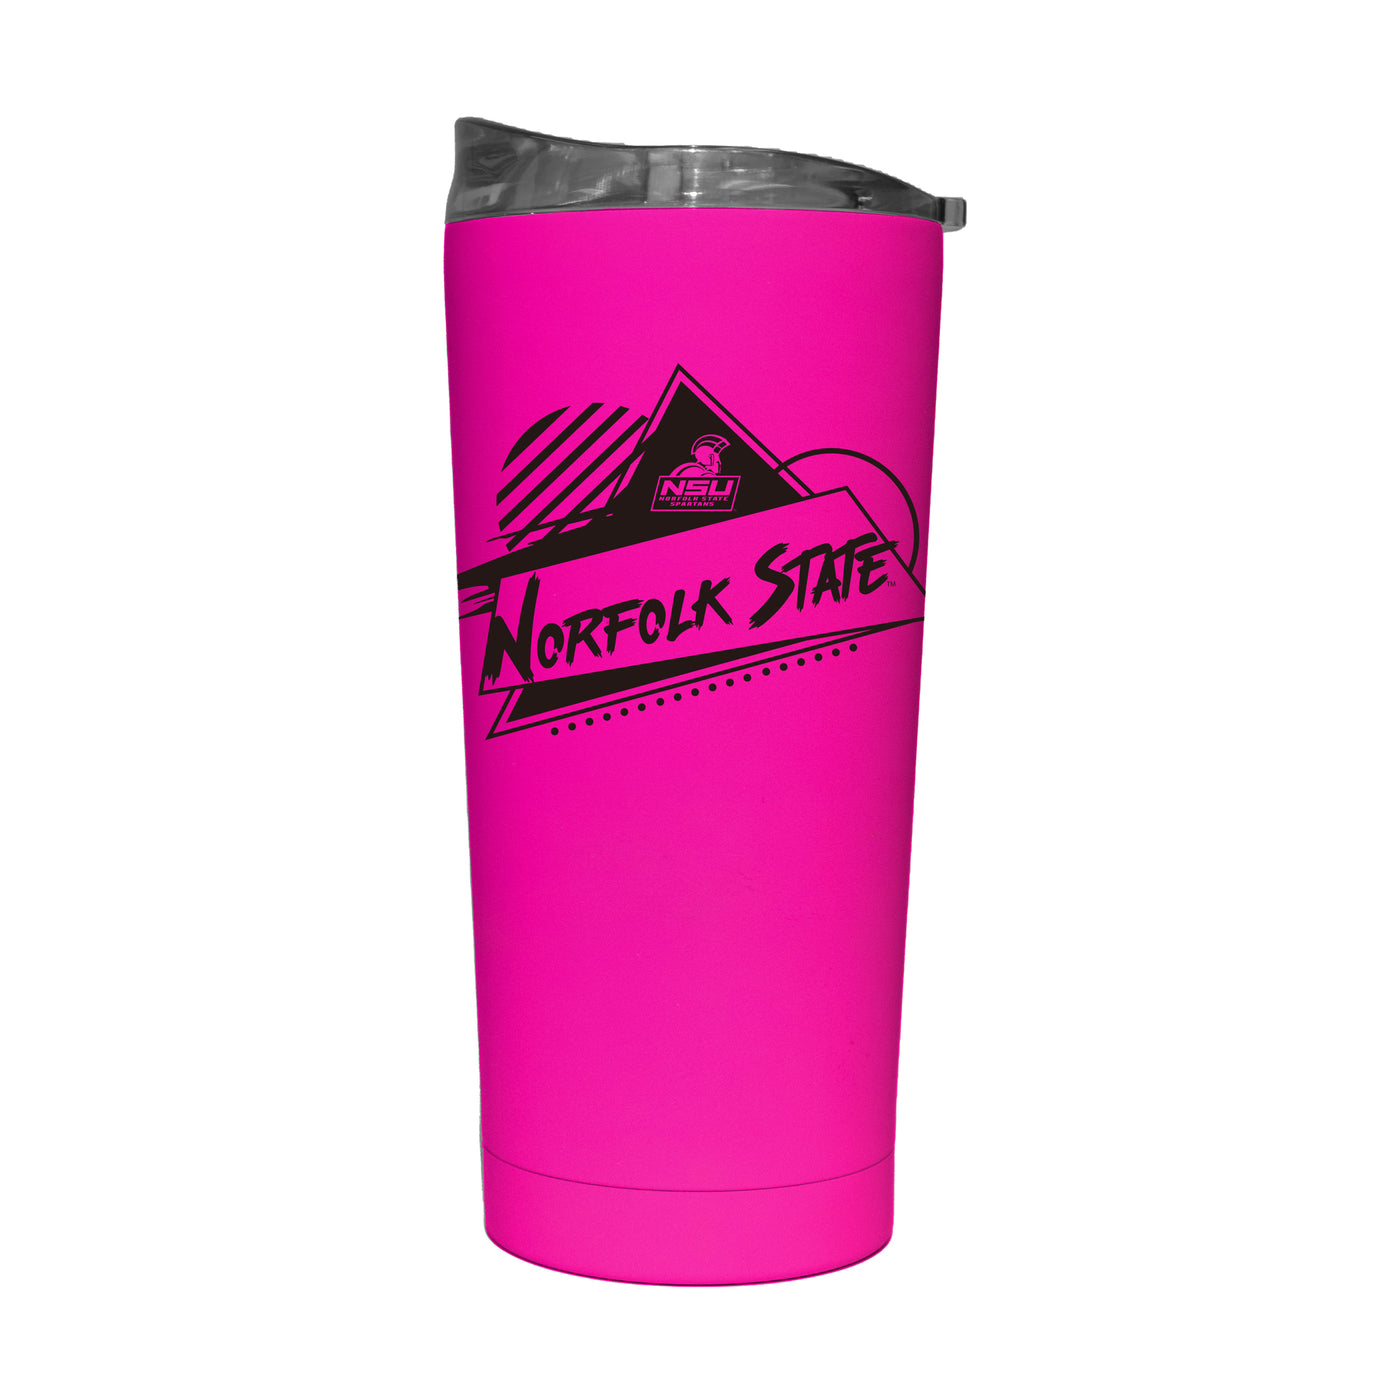 Norfolk State 20oz Electric Rad Soft Touch Tumbler